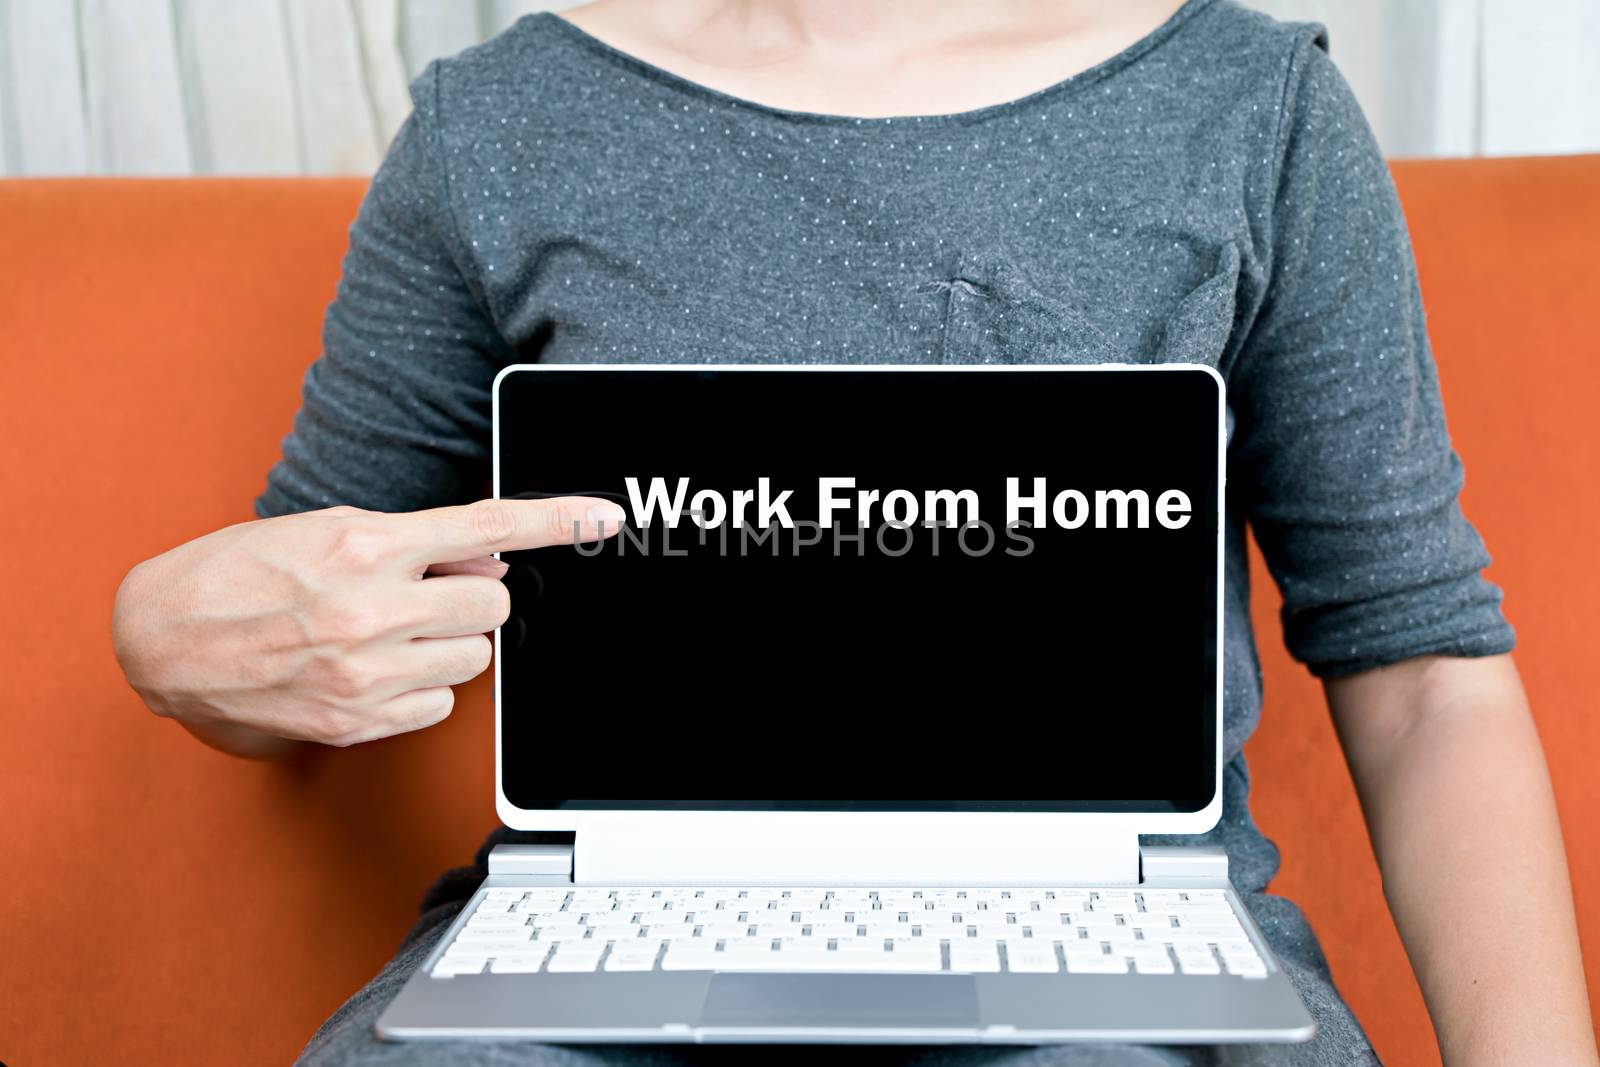 Hand choose work from home on laptop by Buttus_casso